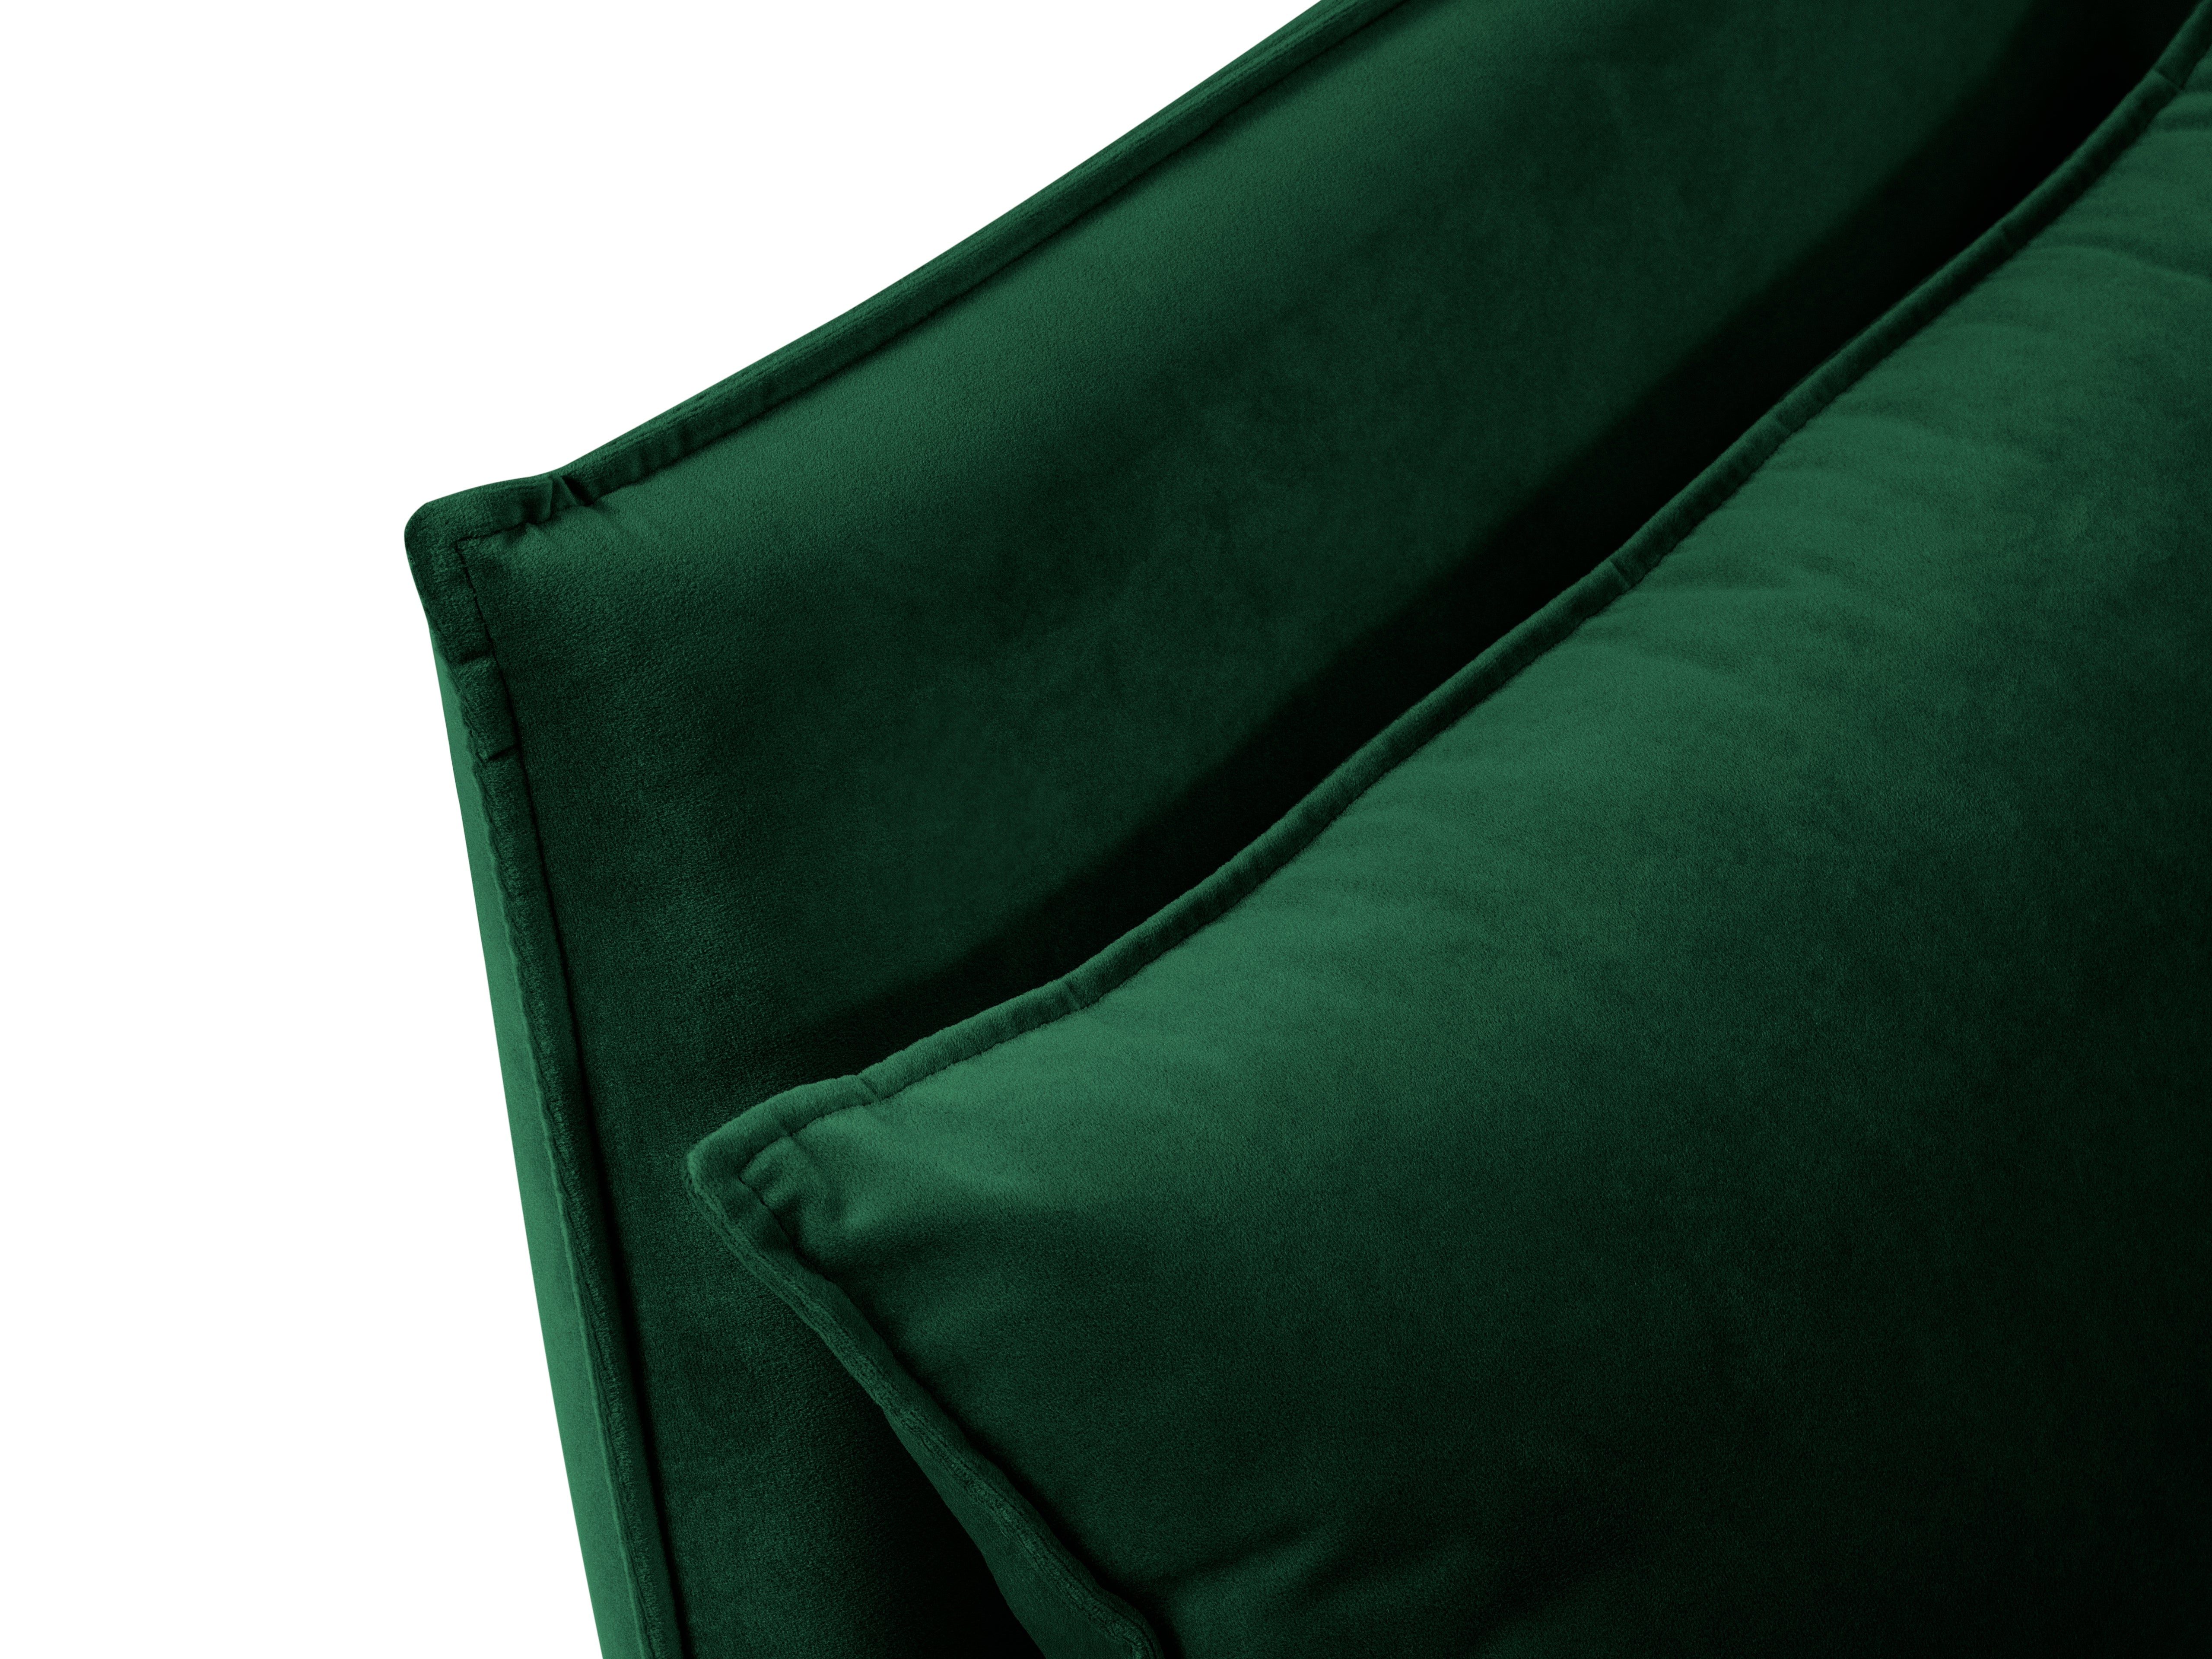 Sofa with glossy bottle green